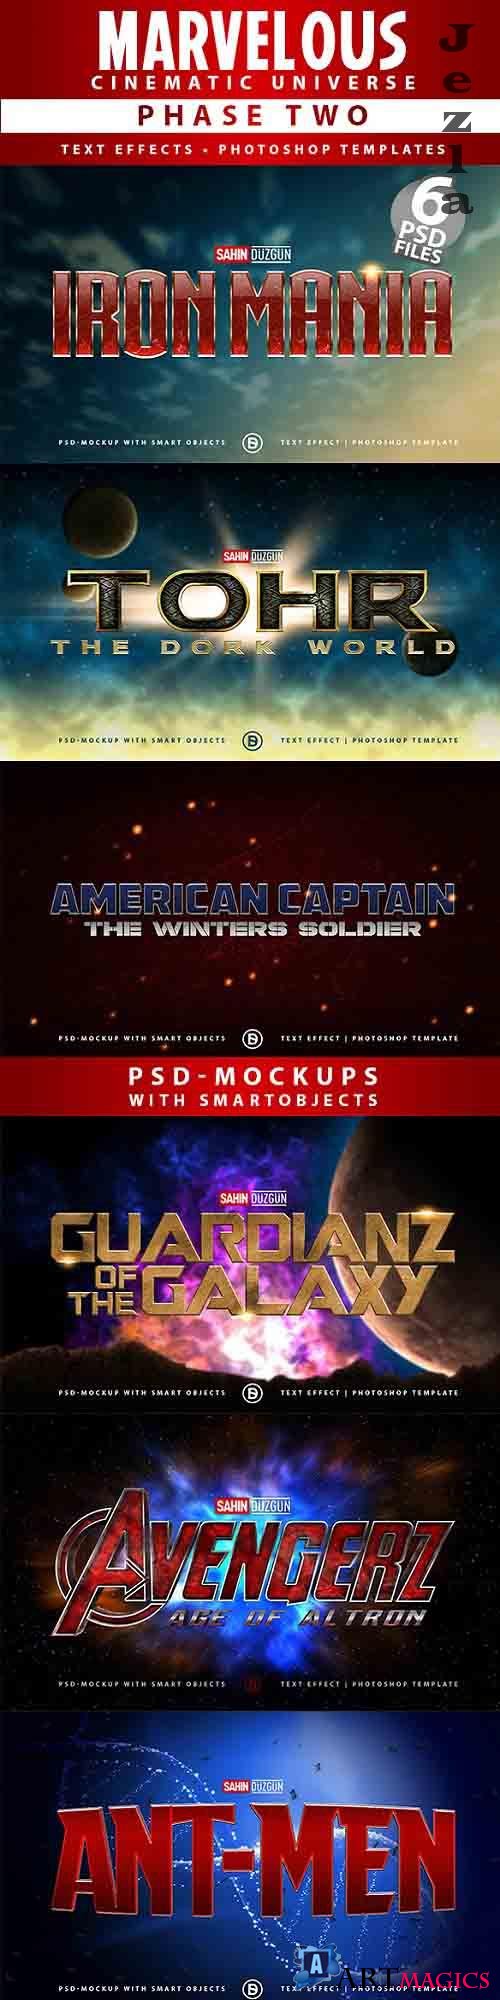 Marvelous Cinematic Universe - Phase Two | Text-Effects/Mockups | Template-Package - 26501533